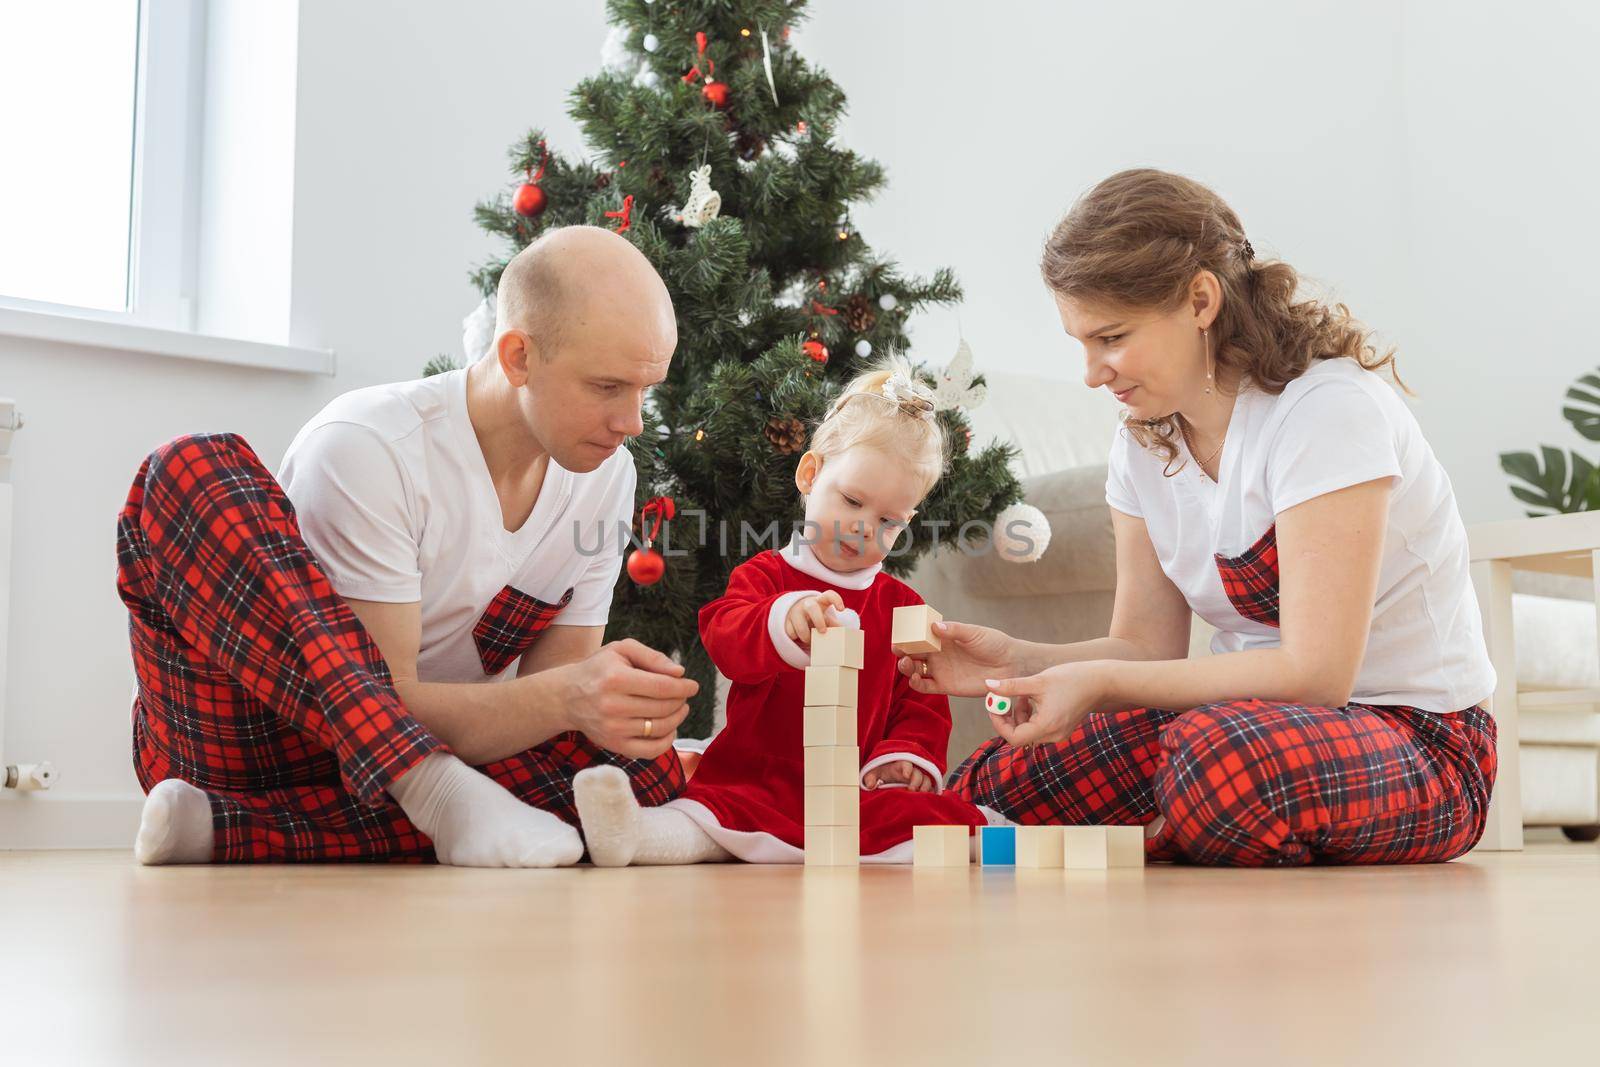 Toddler child with cochlear implant plays with parents under christmas tree - deafness and innovating medical technologies for hearing aid by Satura86